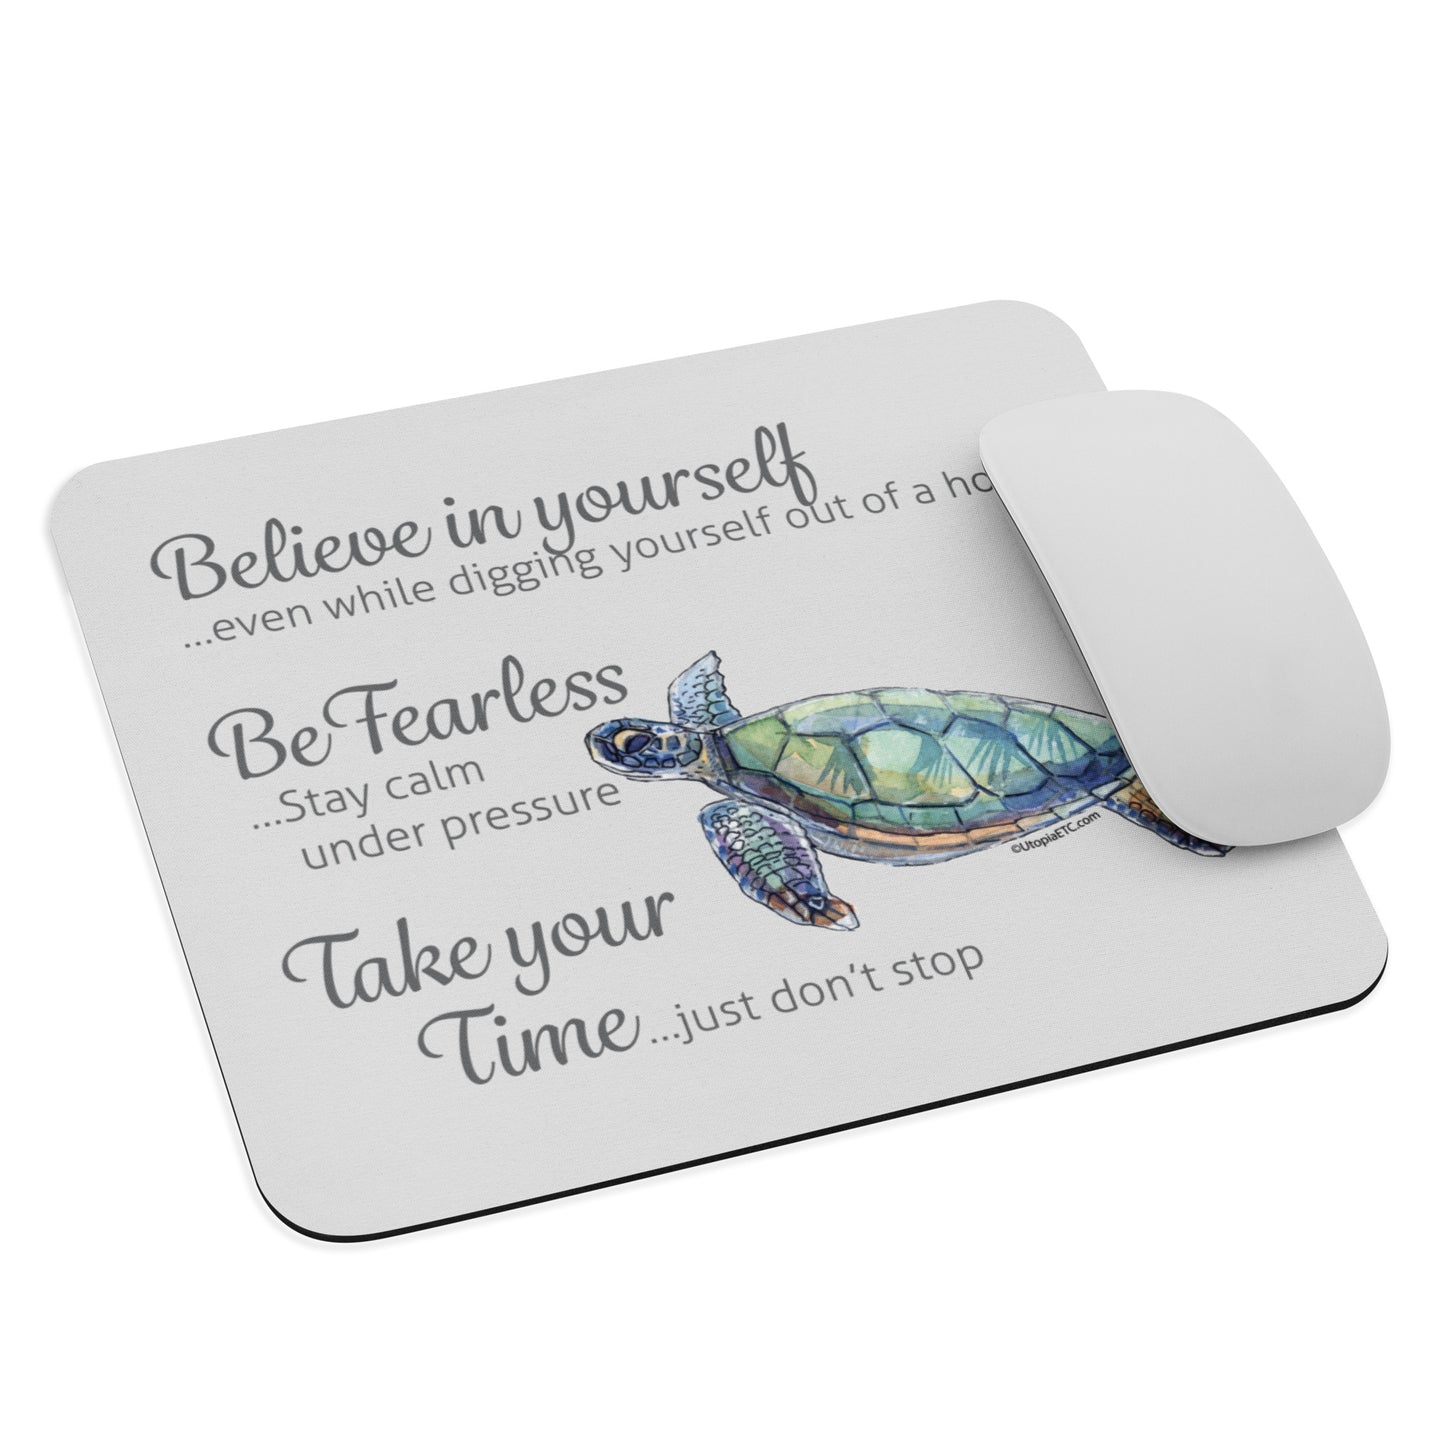 Believe in Yourself PM310 Mouse Pad